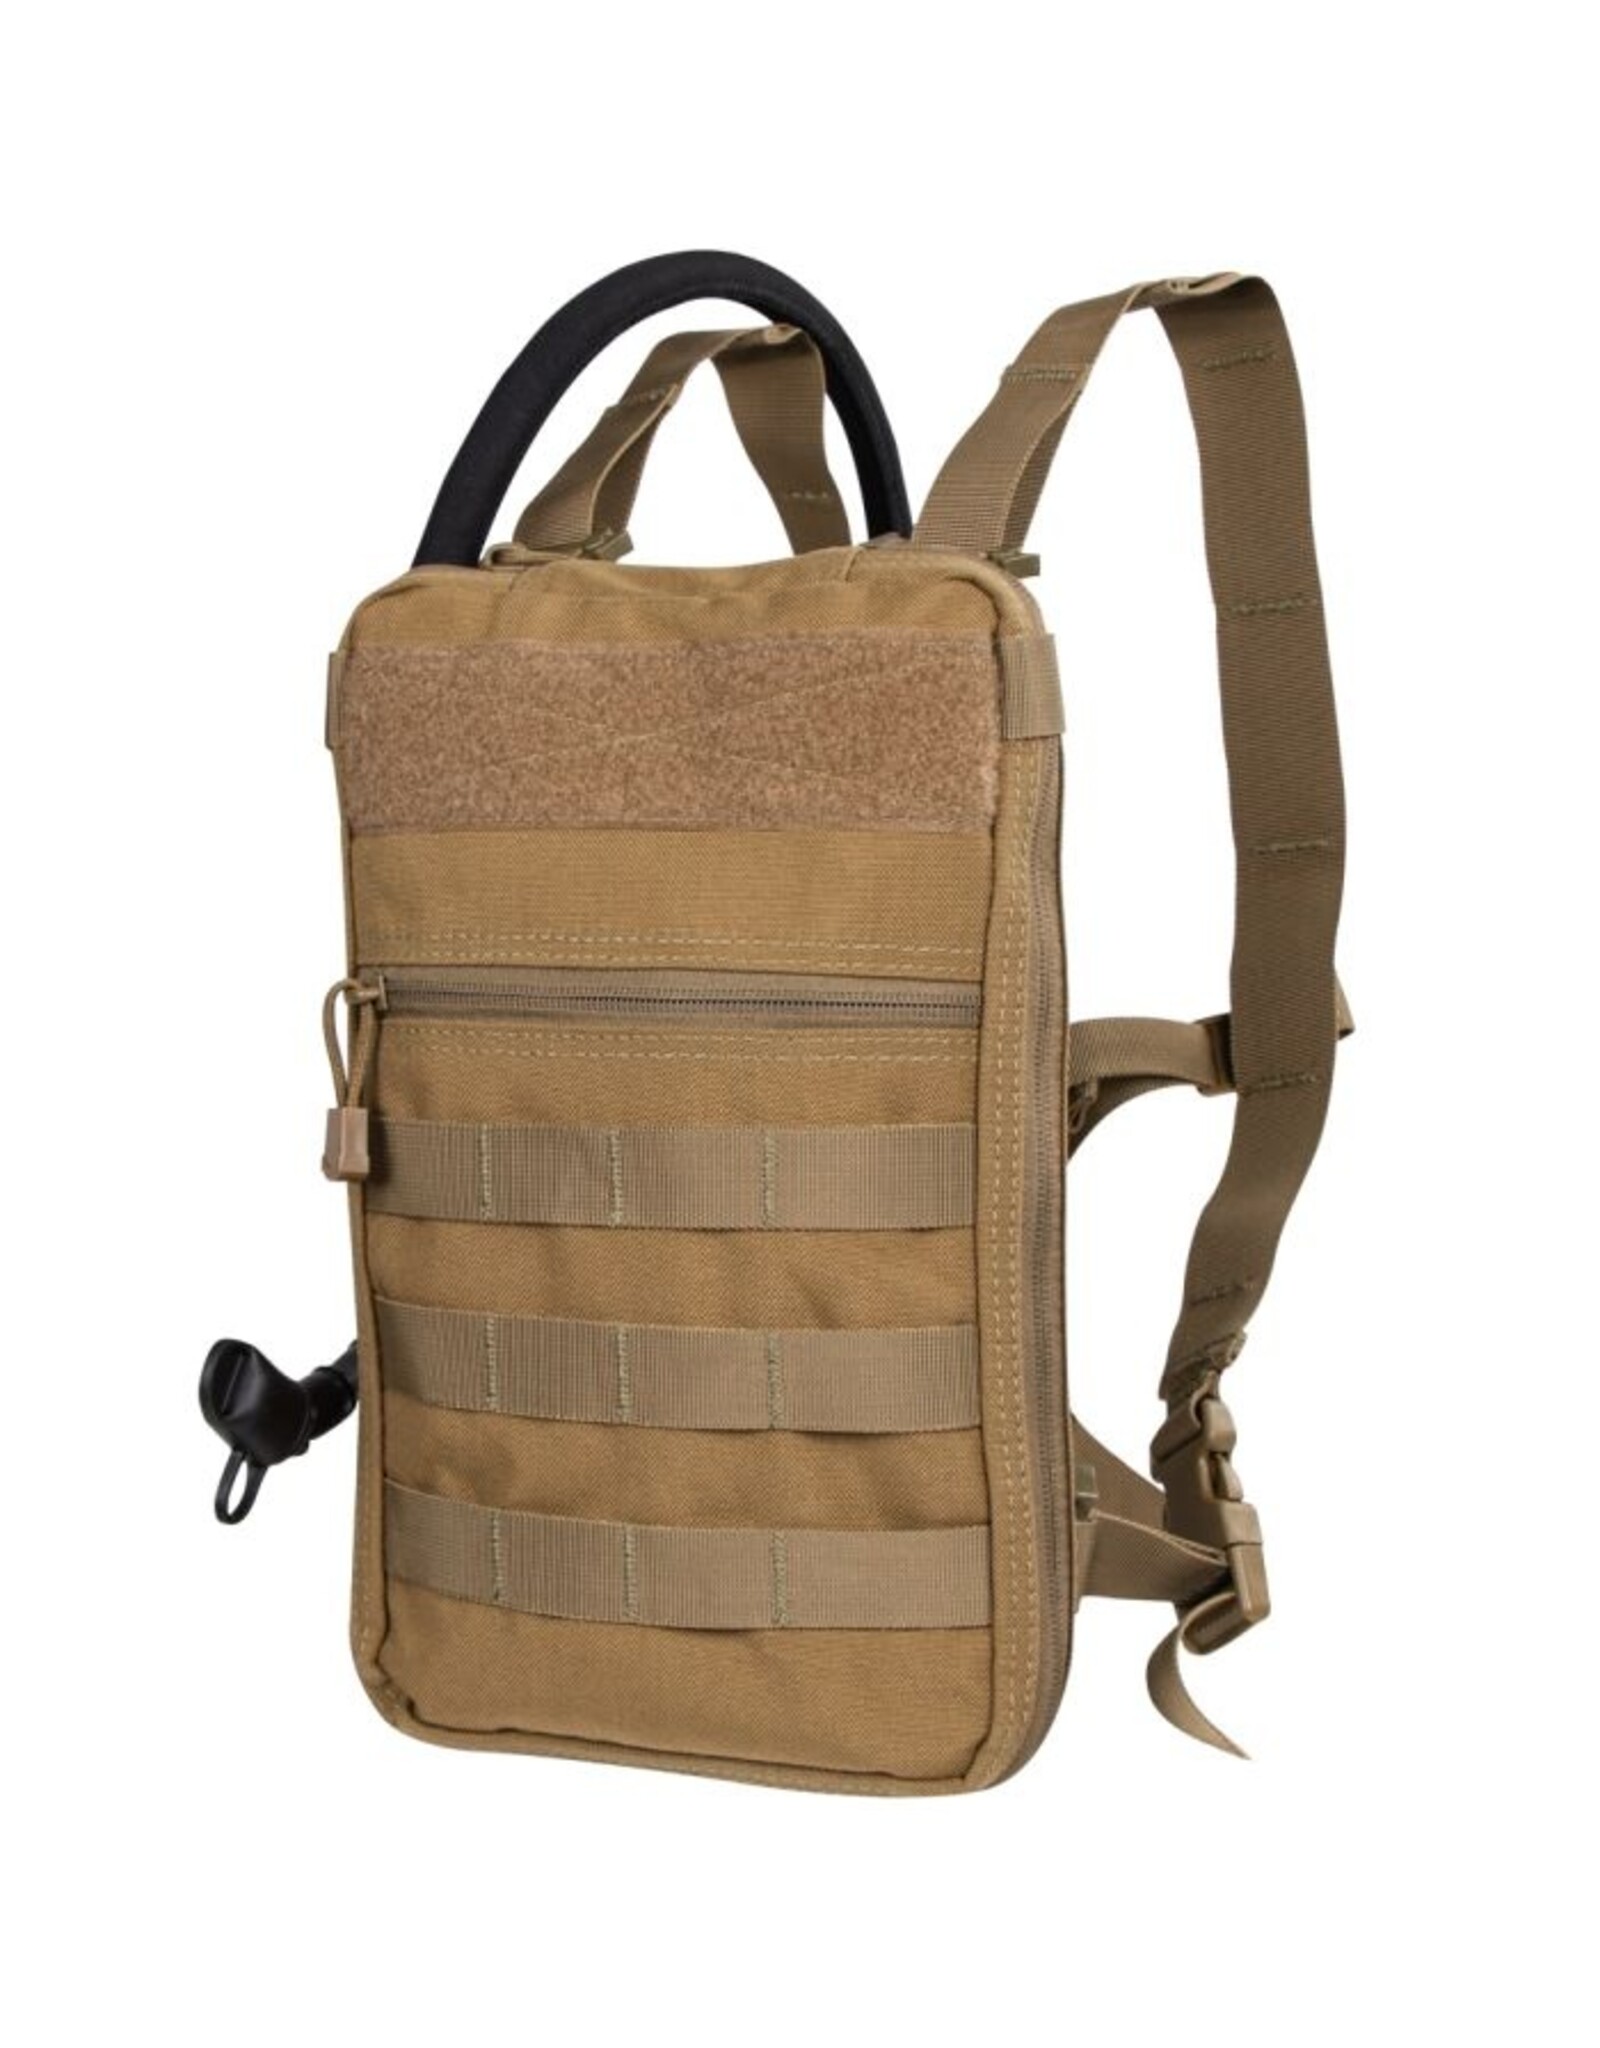 CONDOR TACTICAL TIDEPOOL HYDRATION CARRIER